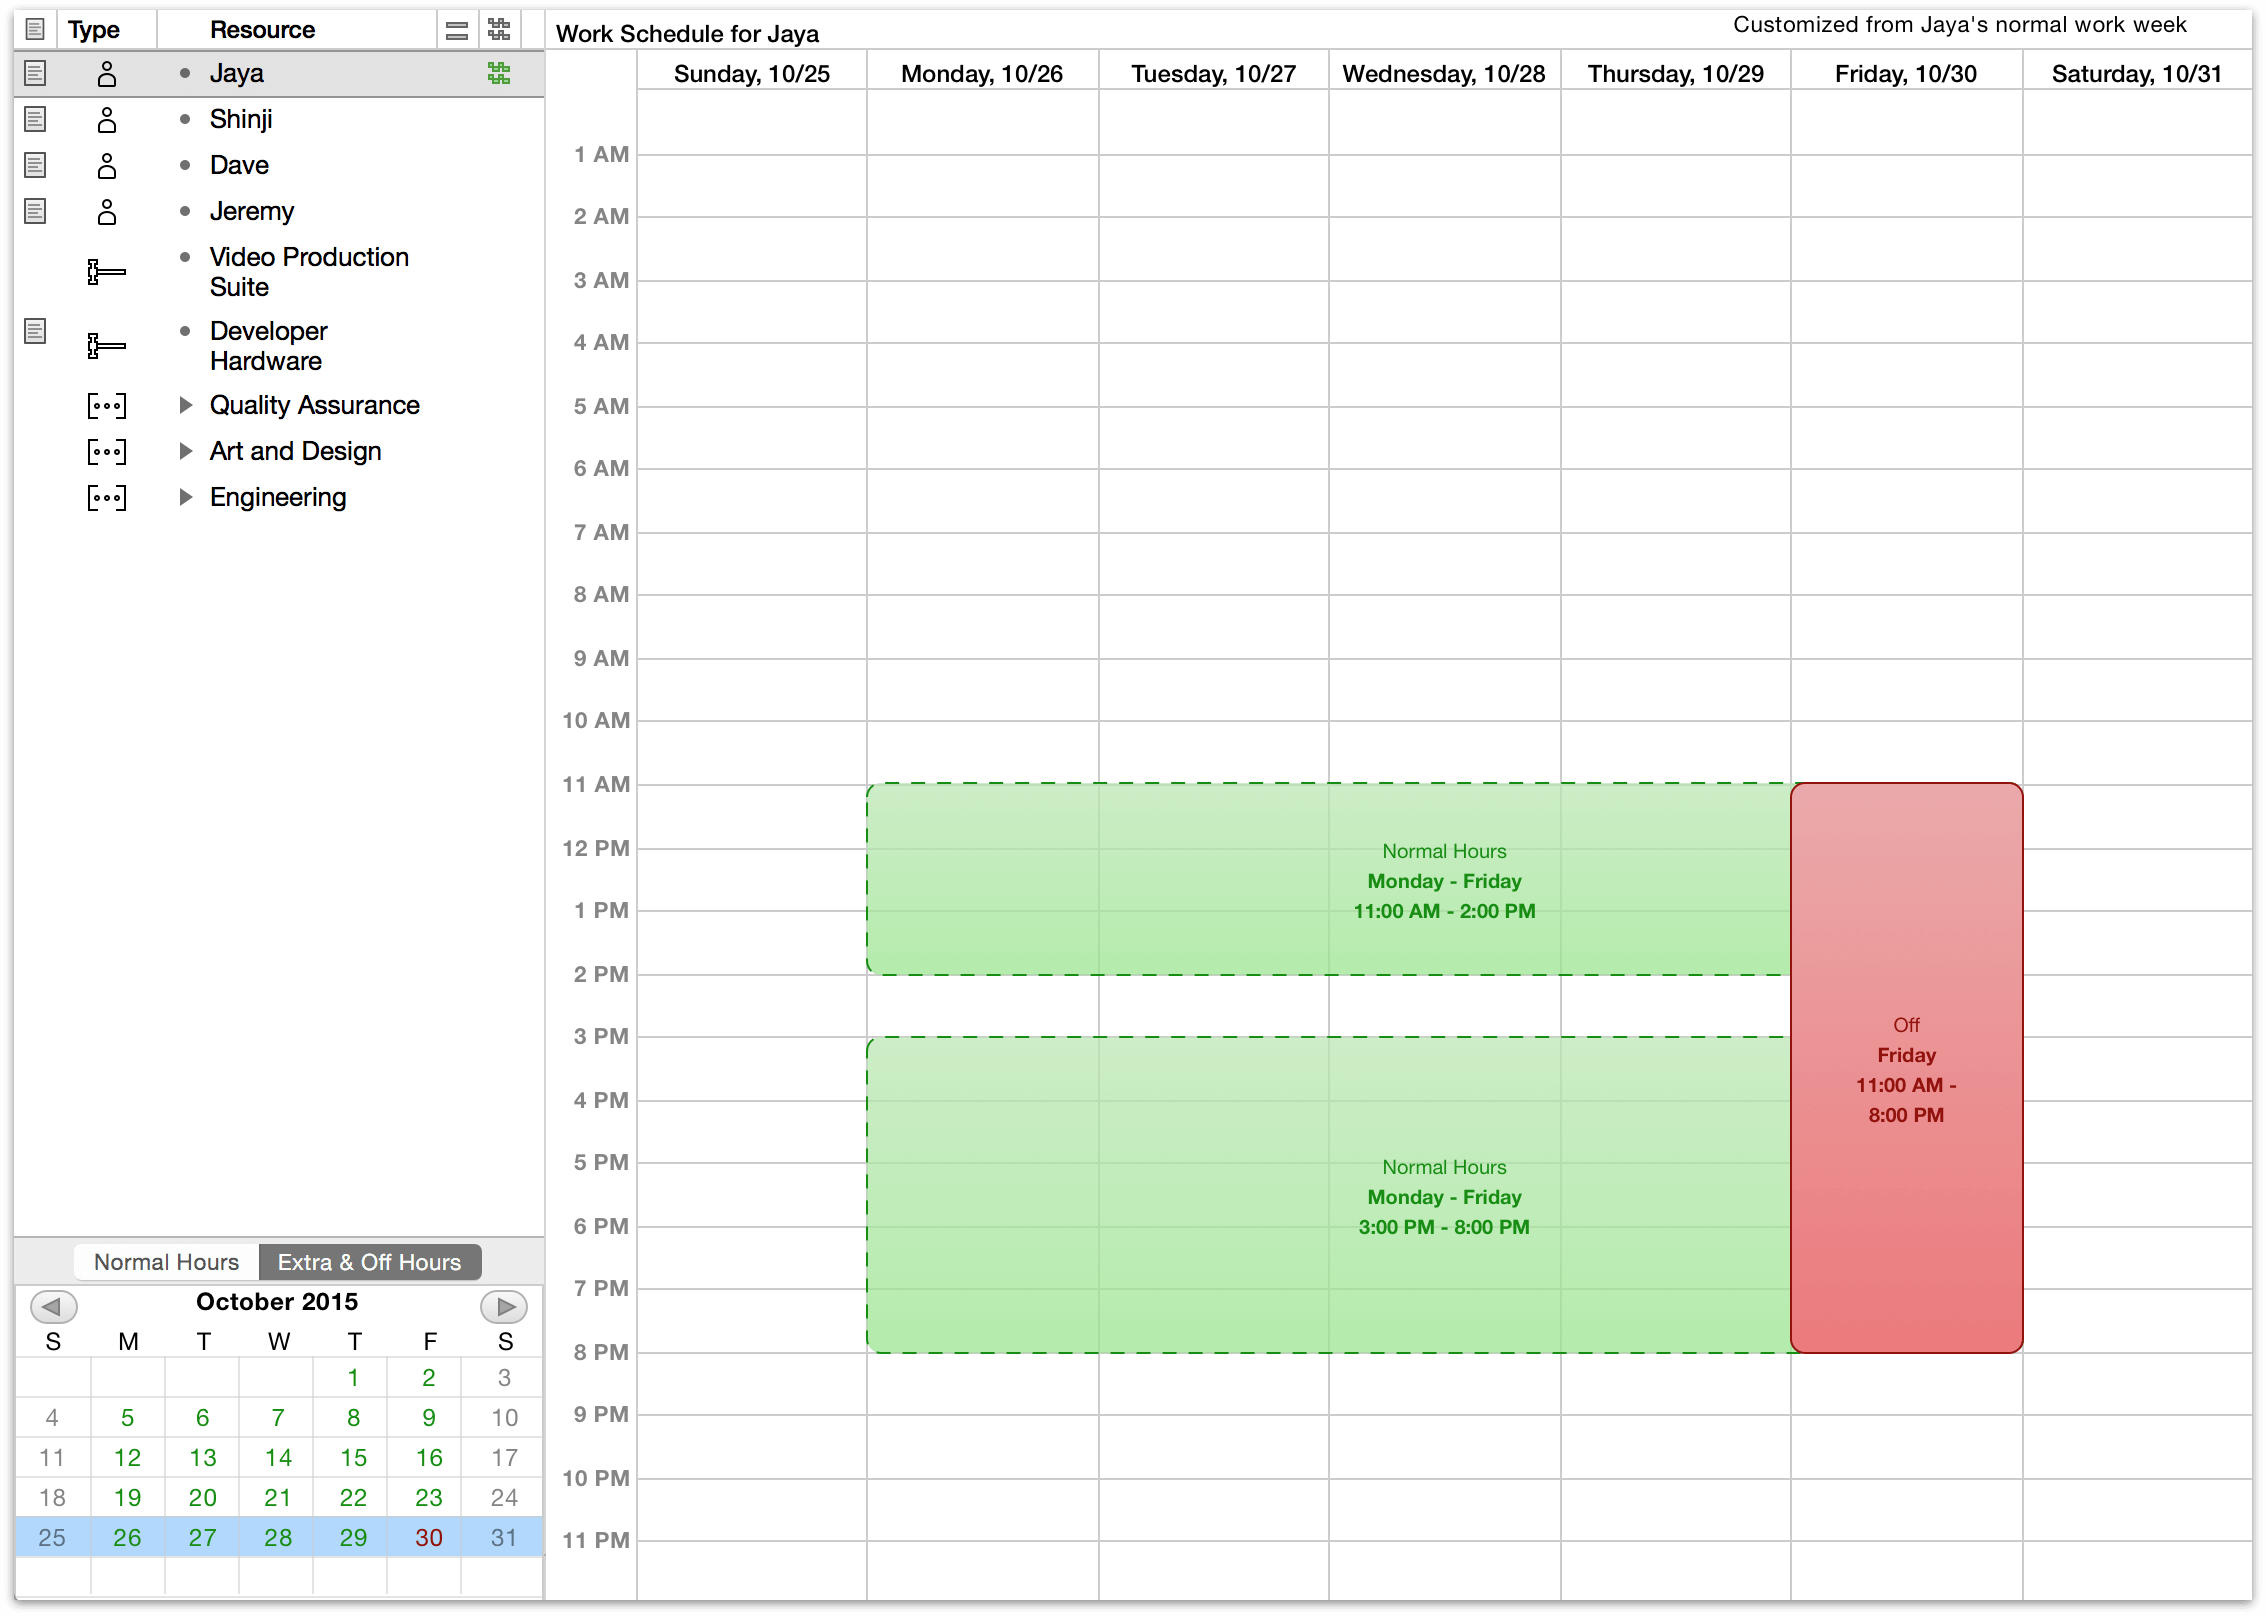 Describing vacation time for an individual staff member in Calendar view.